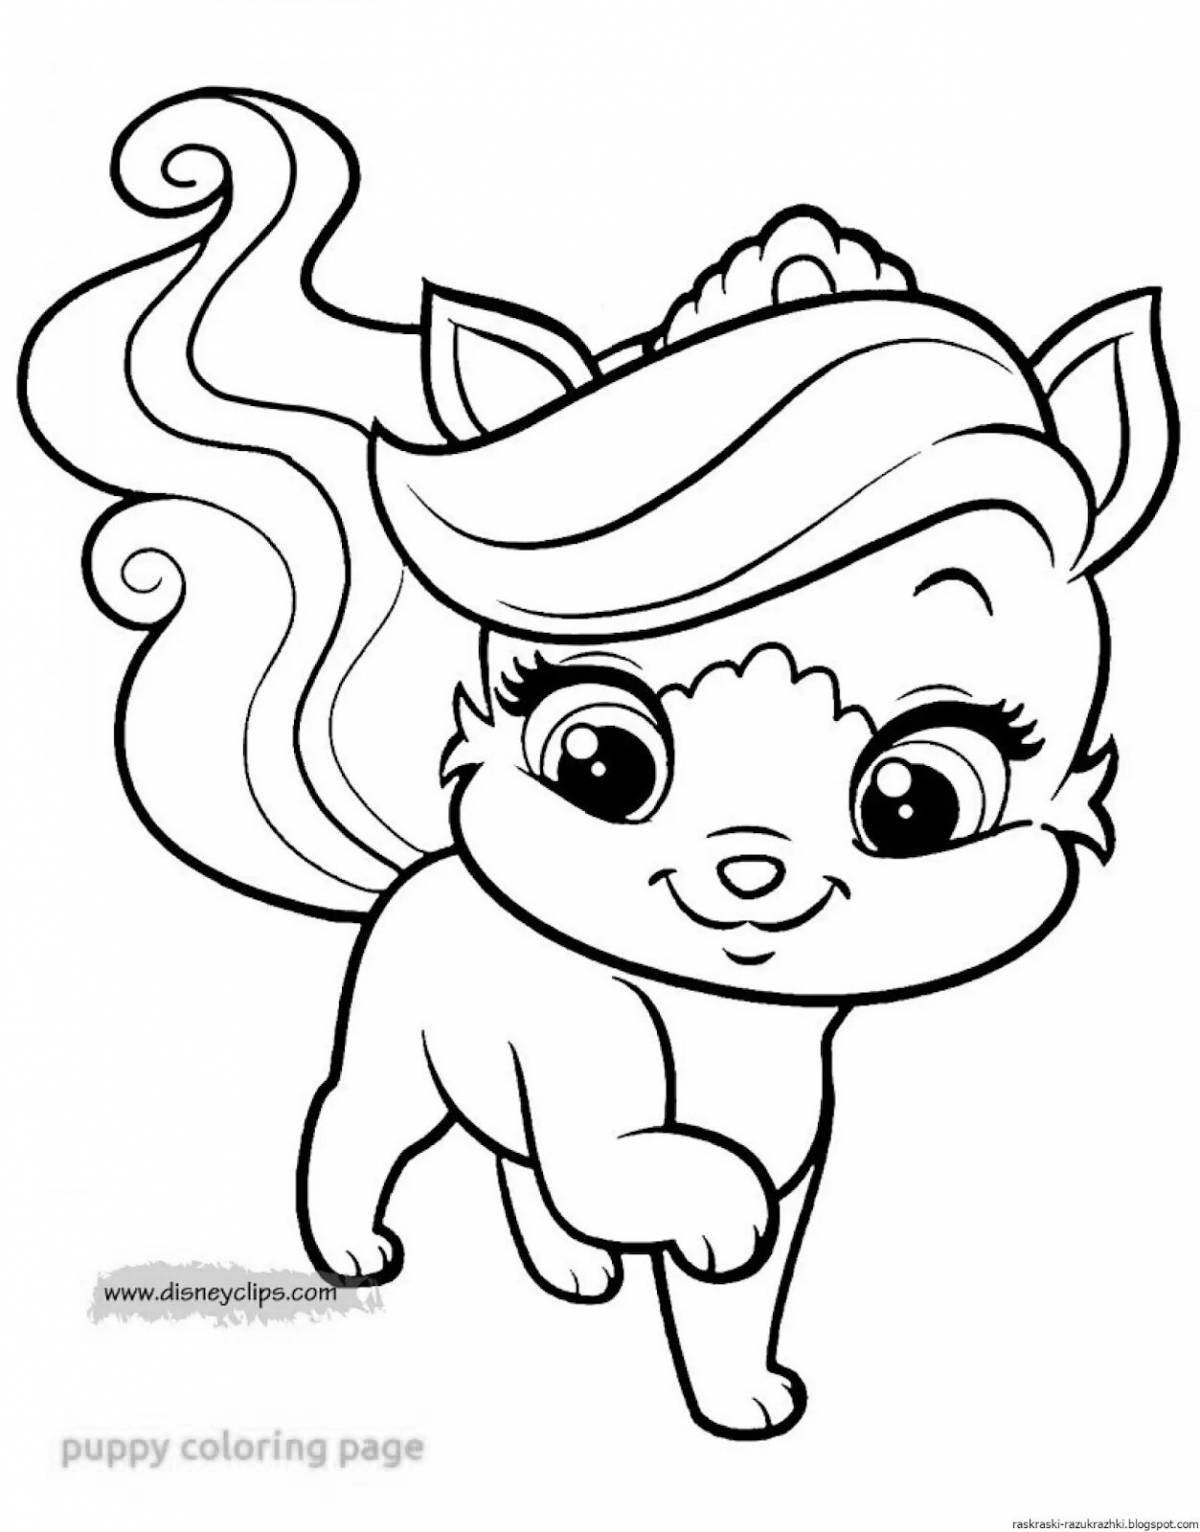 Animated dog coloring book for girls